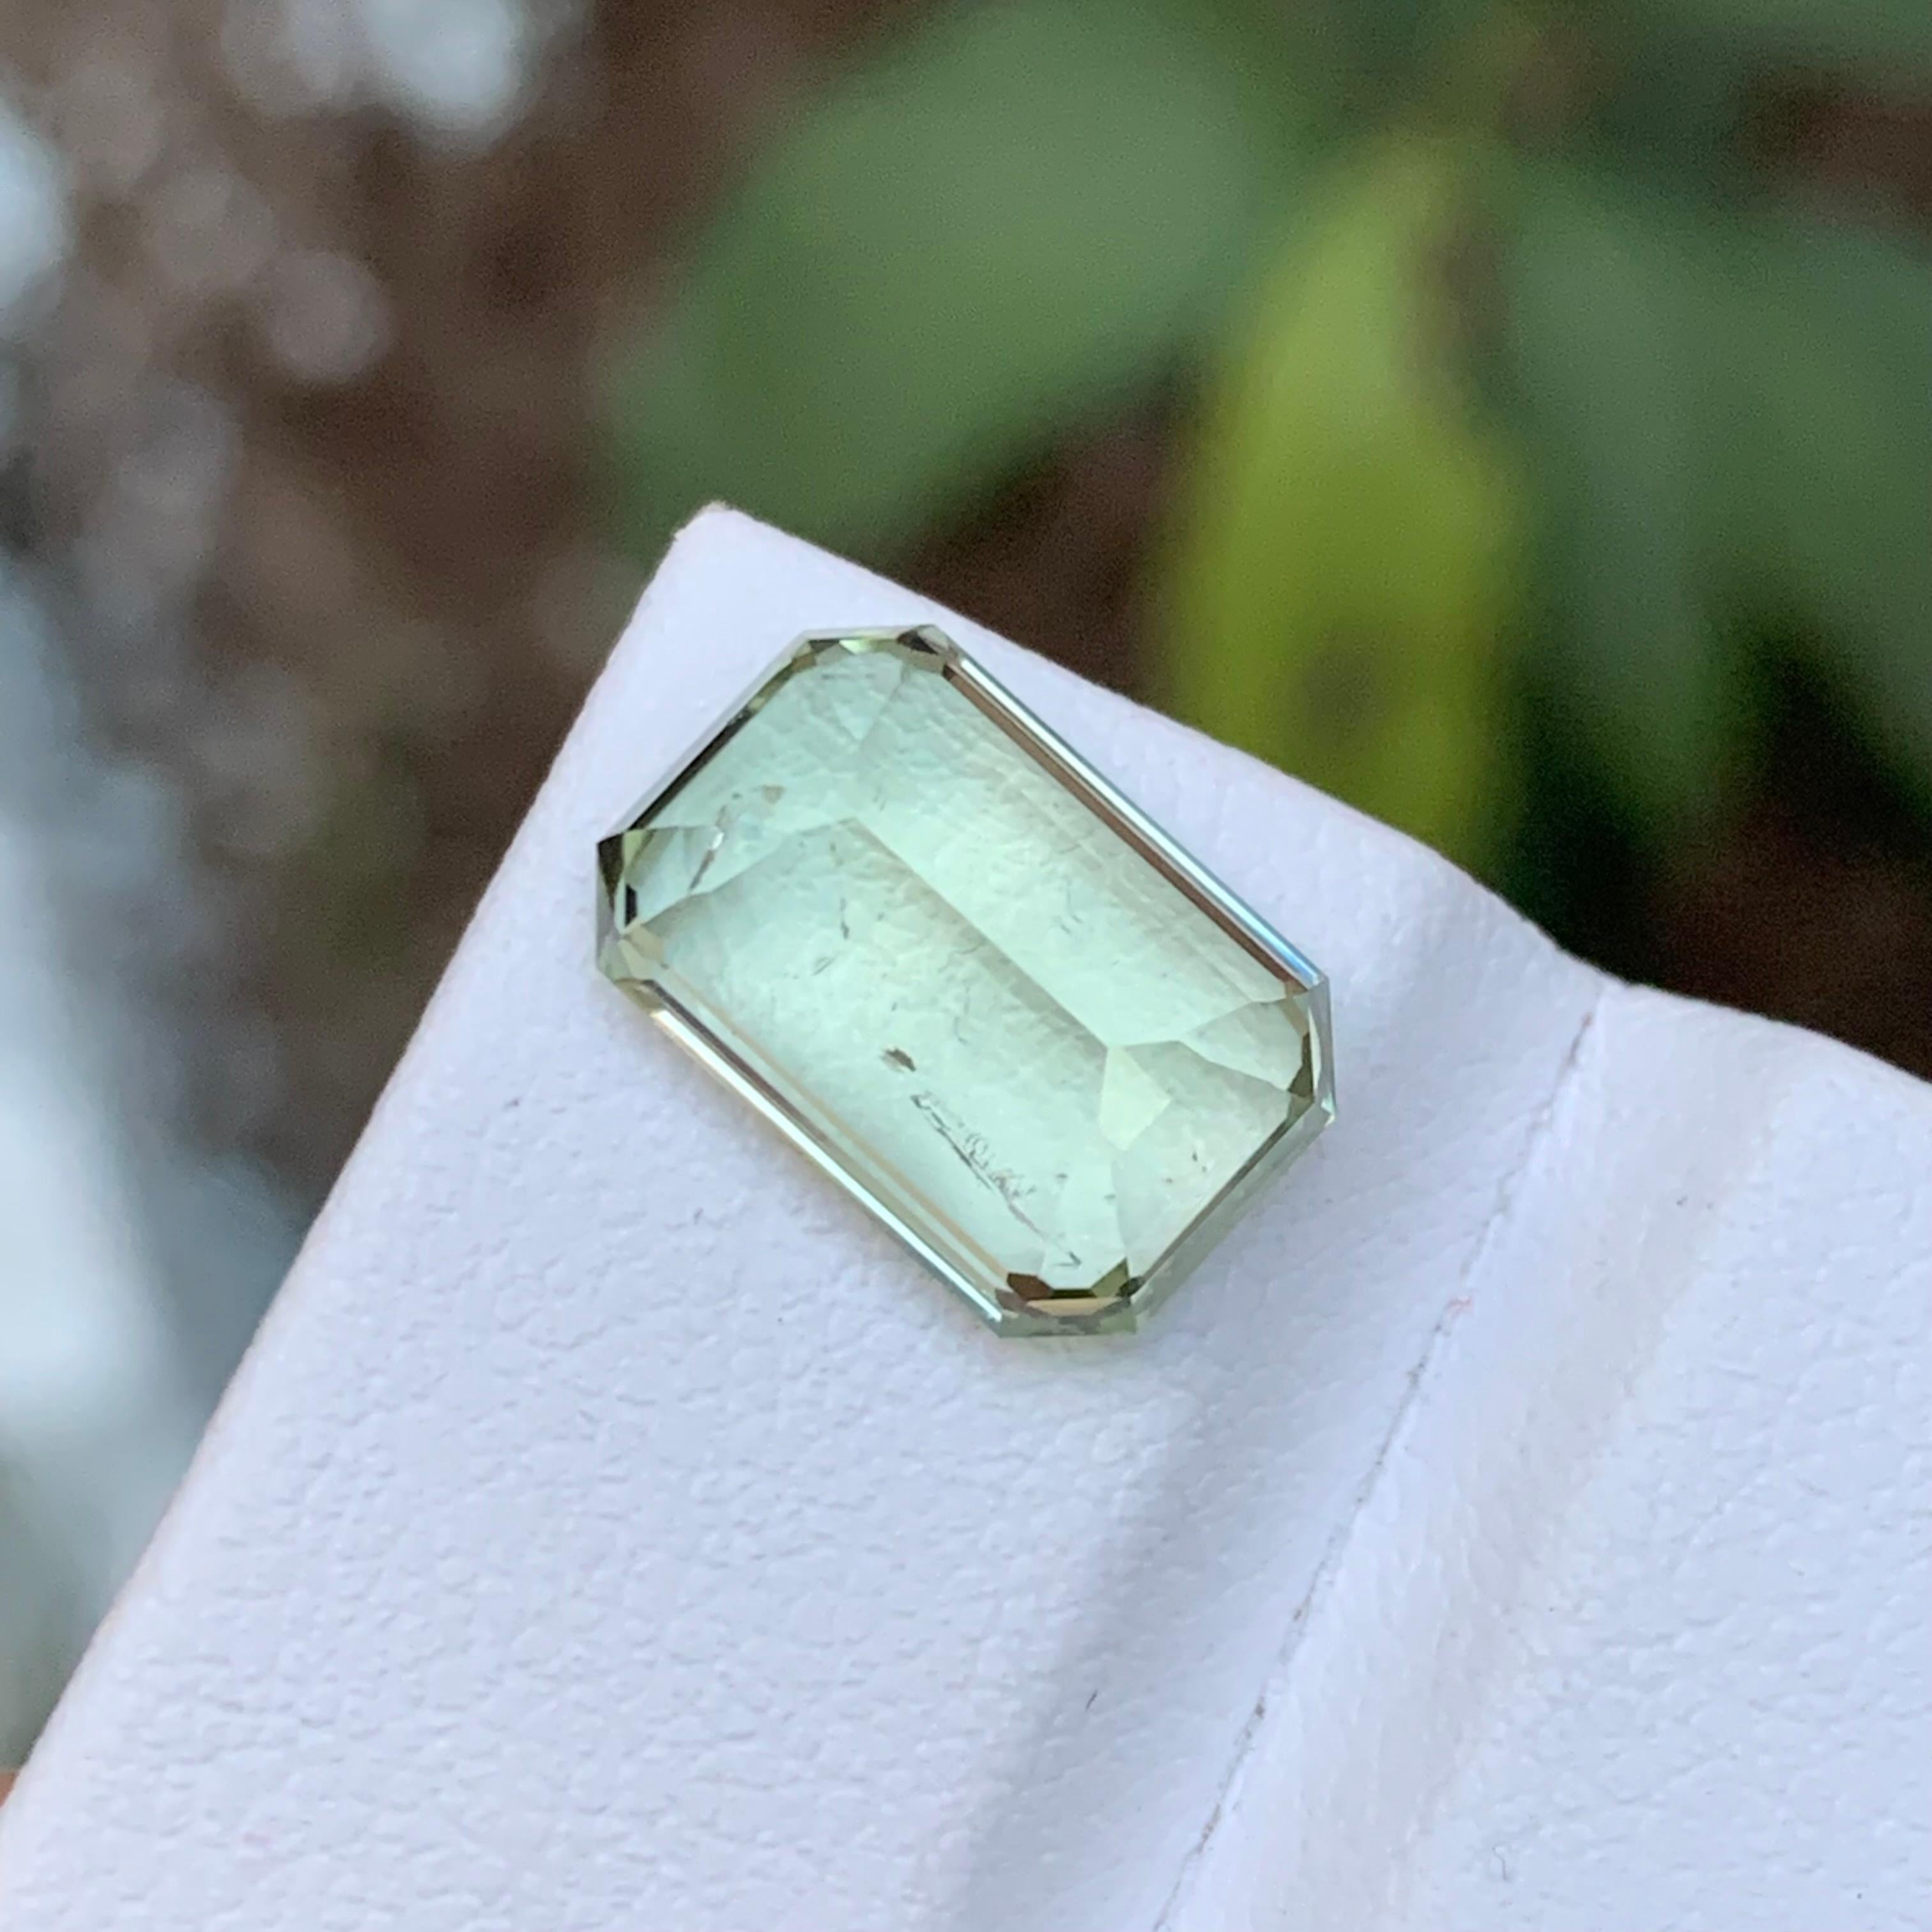 Rare Pastel Green Natural Tourmaline Gemstone, 5.05 Ct Emerald Cut-Ring/Jewelry For Sale 1